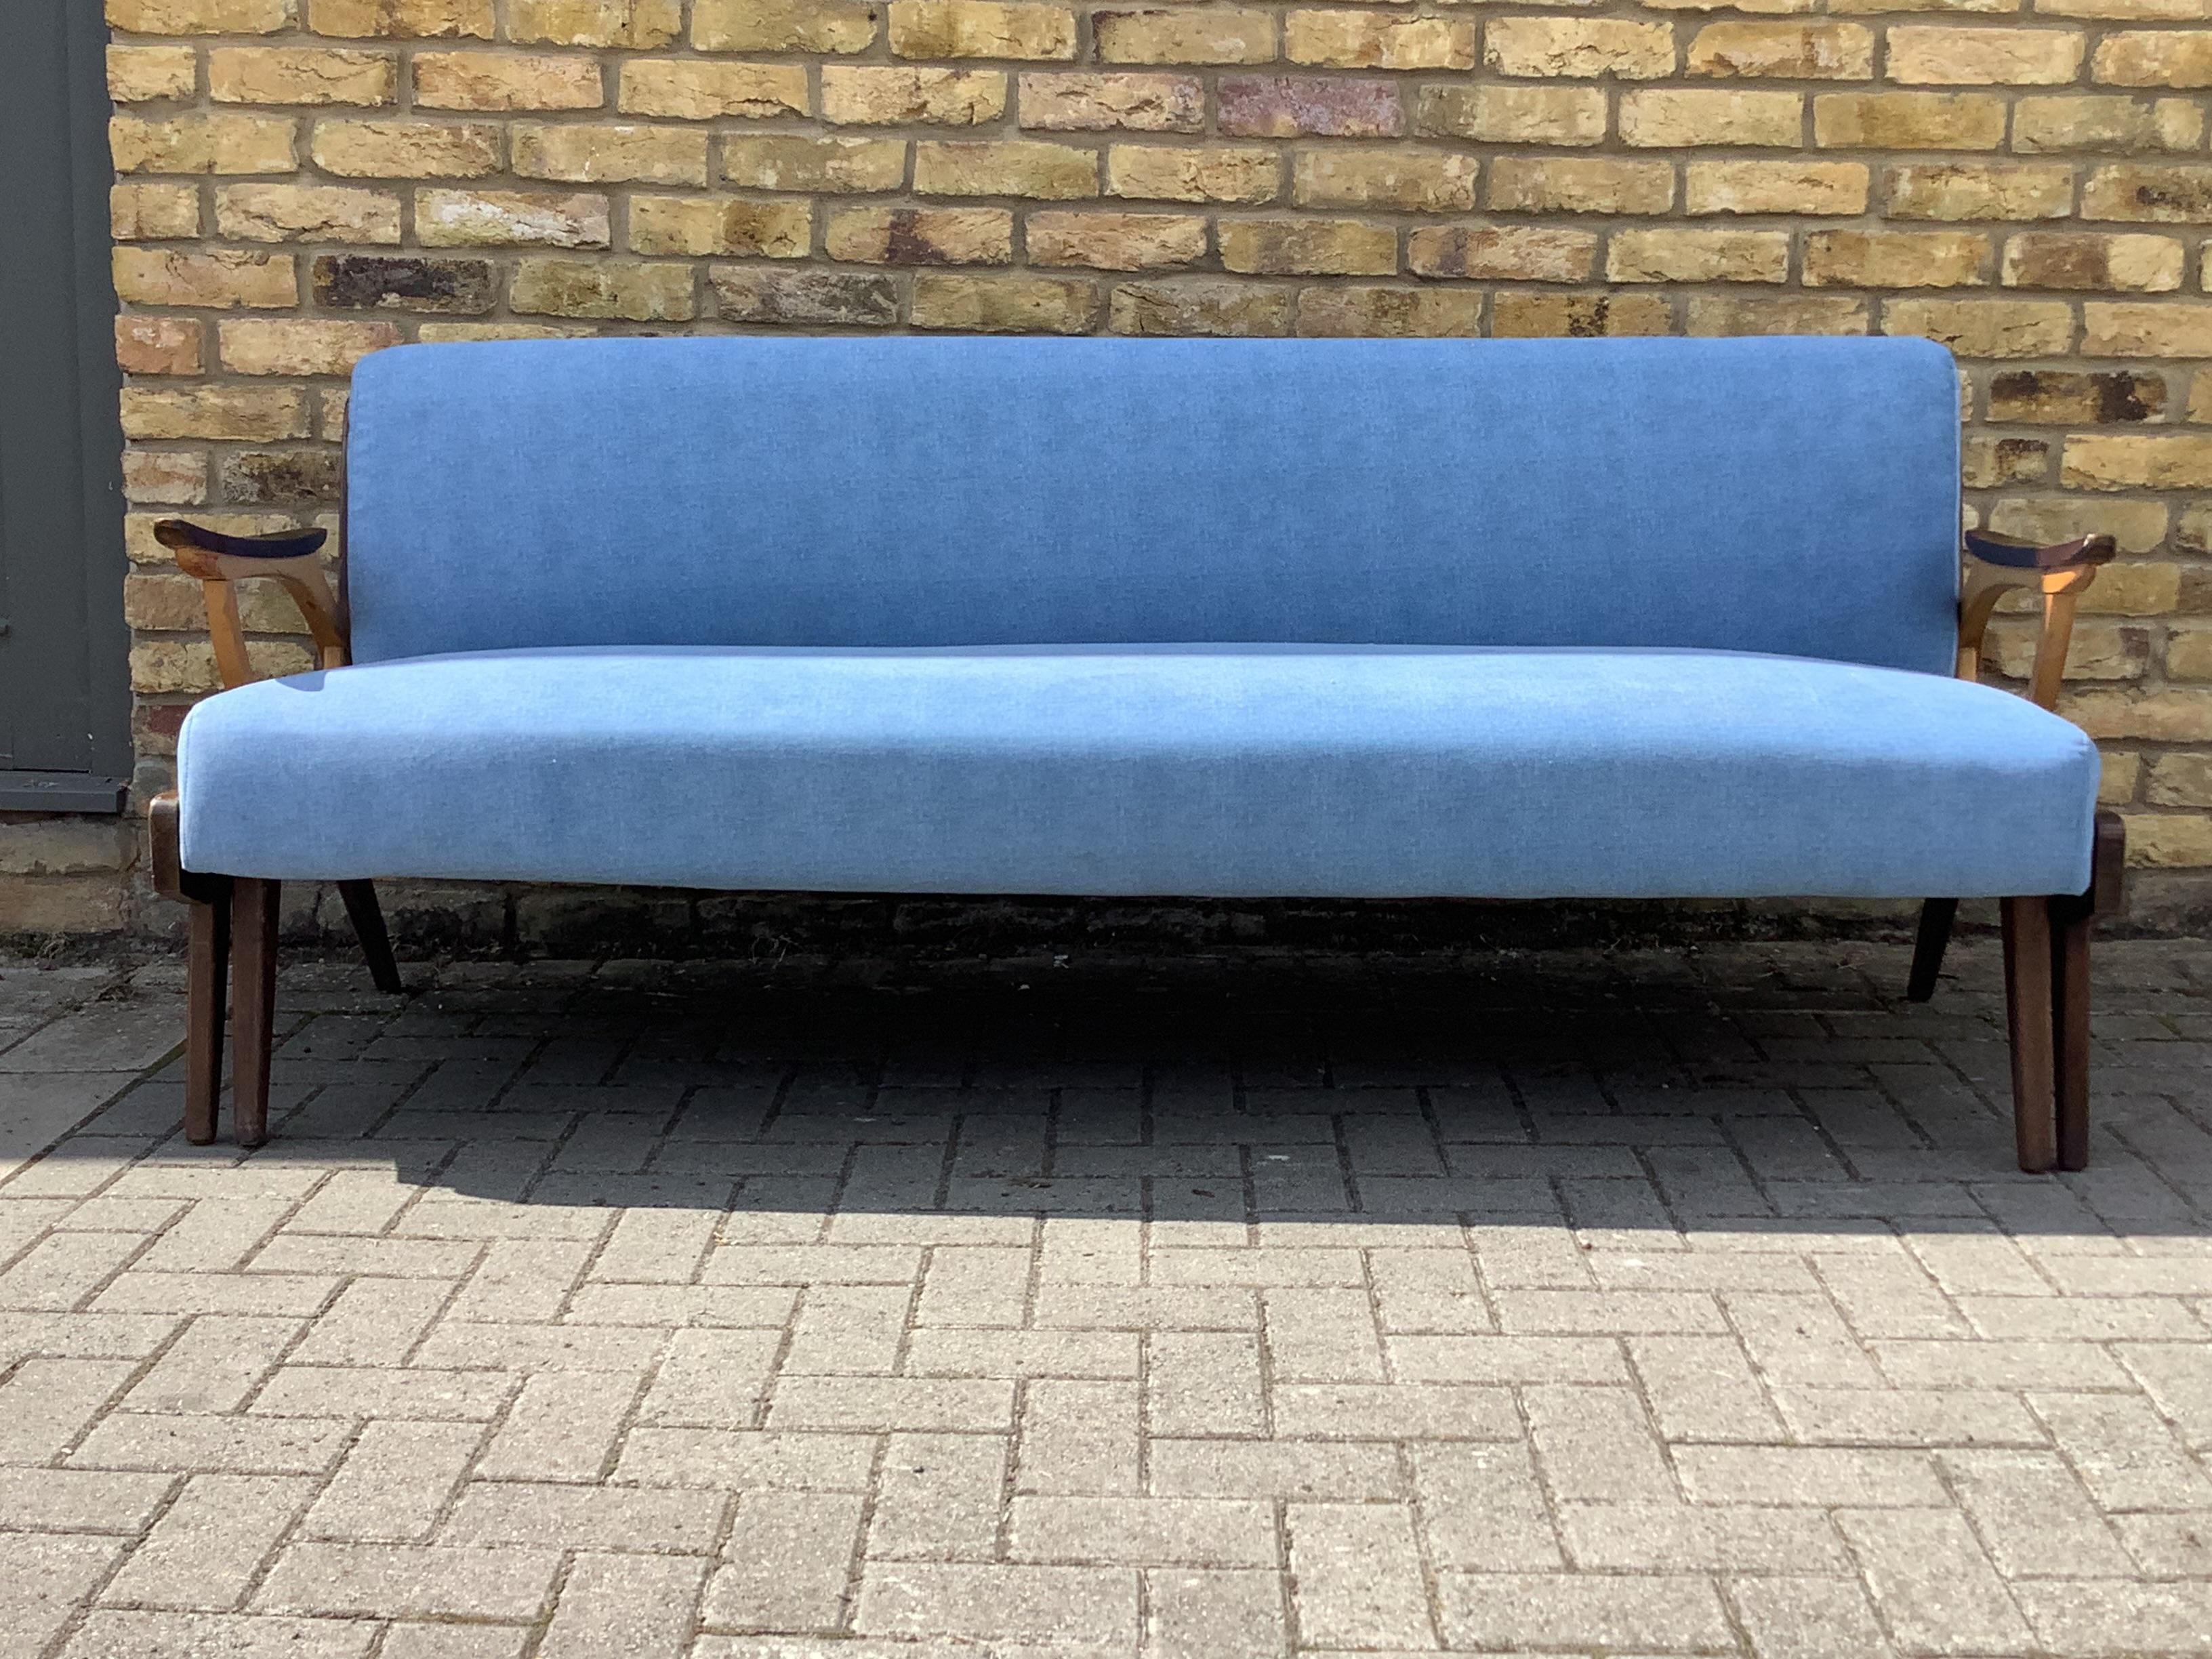 Czech 1950’s sofa bed/mid century modern daybed For Sale